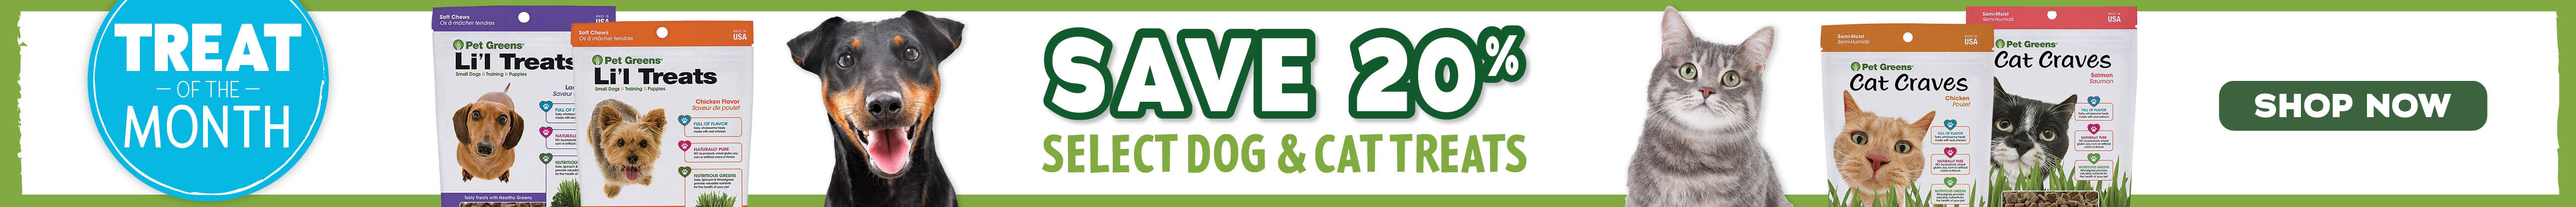 May Treat of the month - Save 20% on select dog and cat treats - shop now